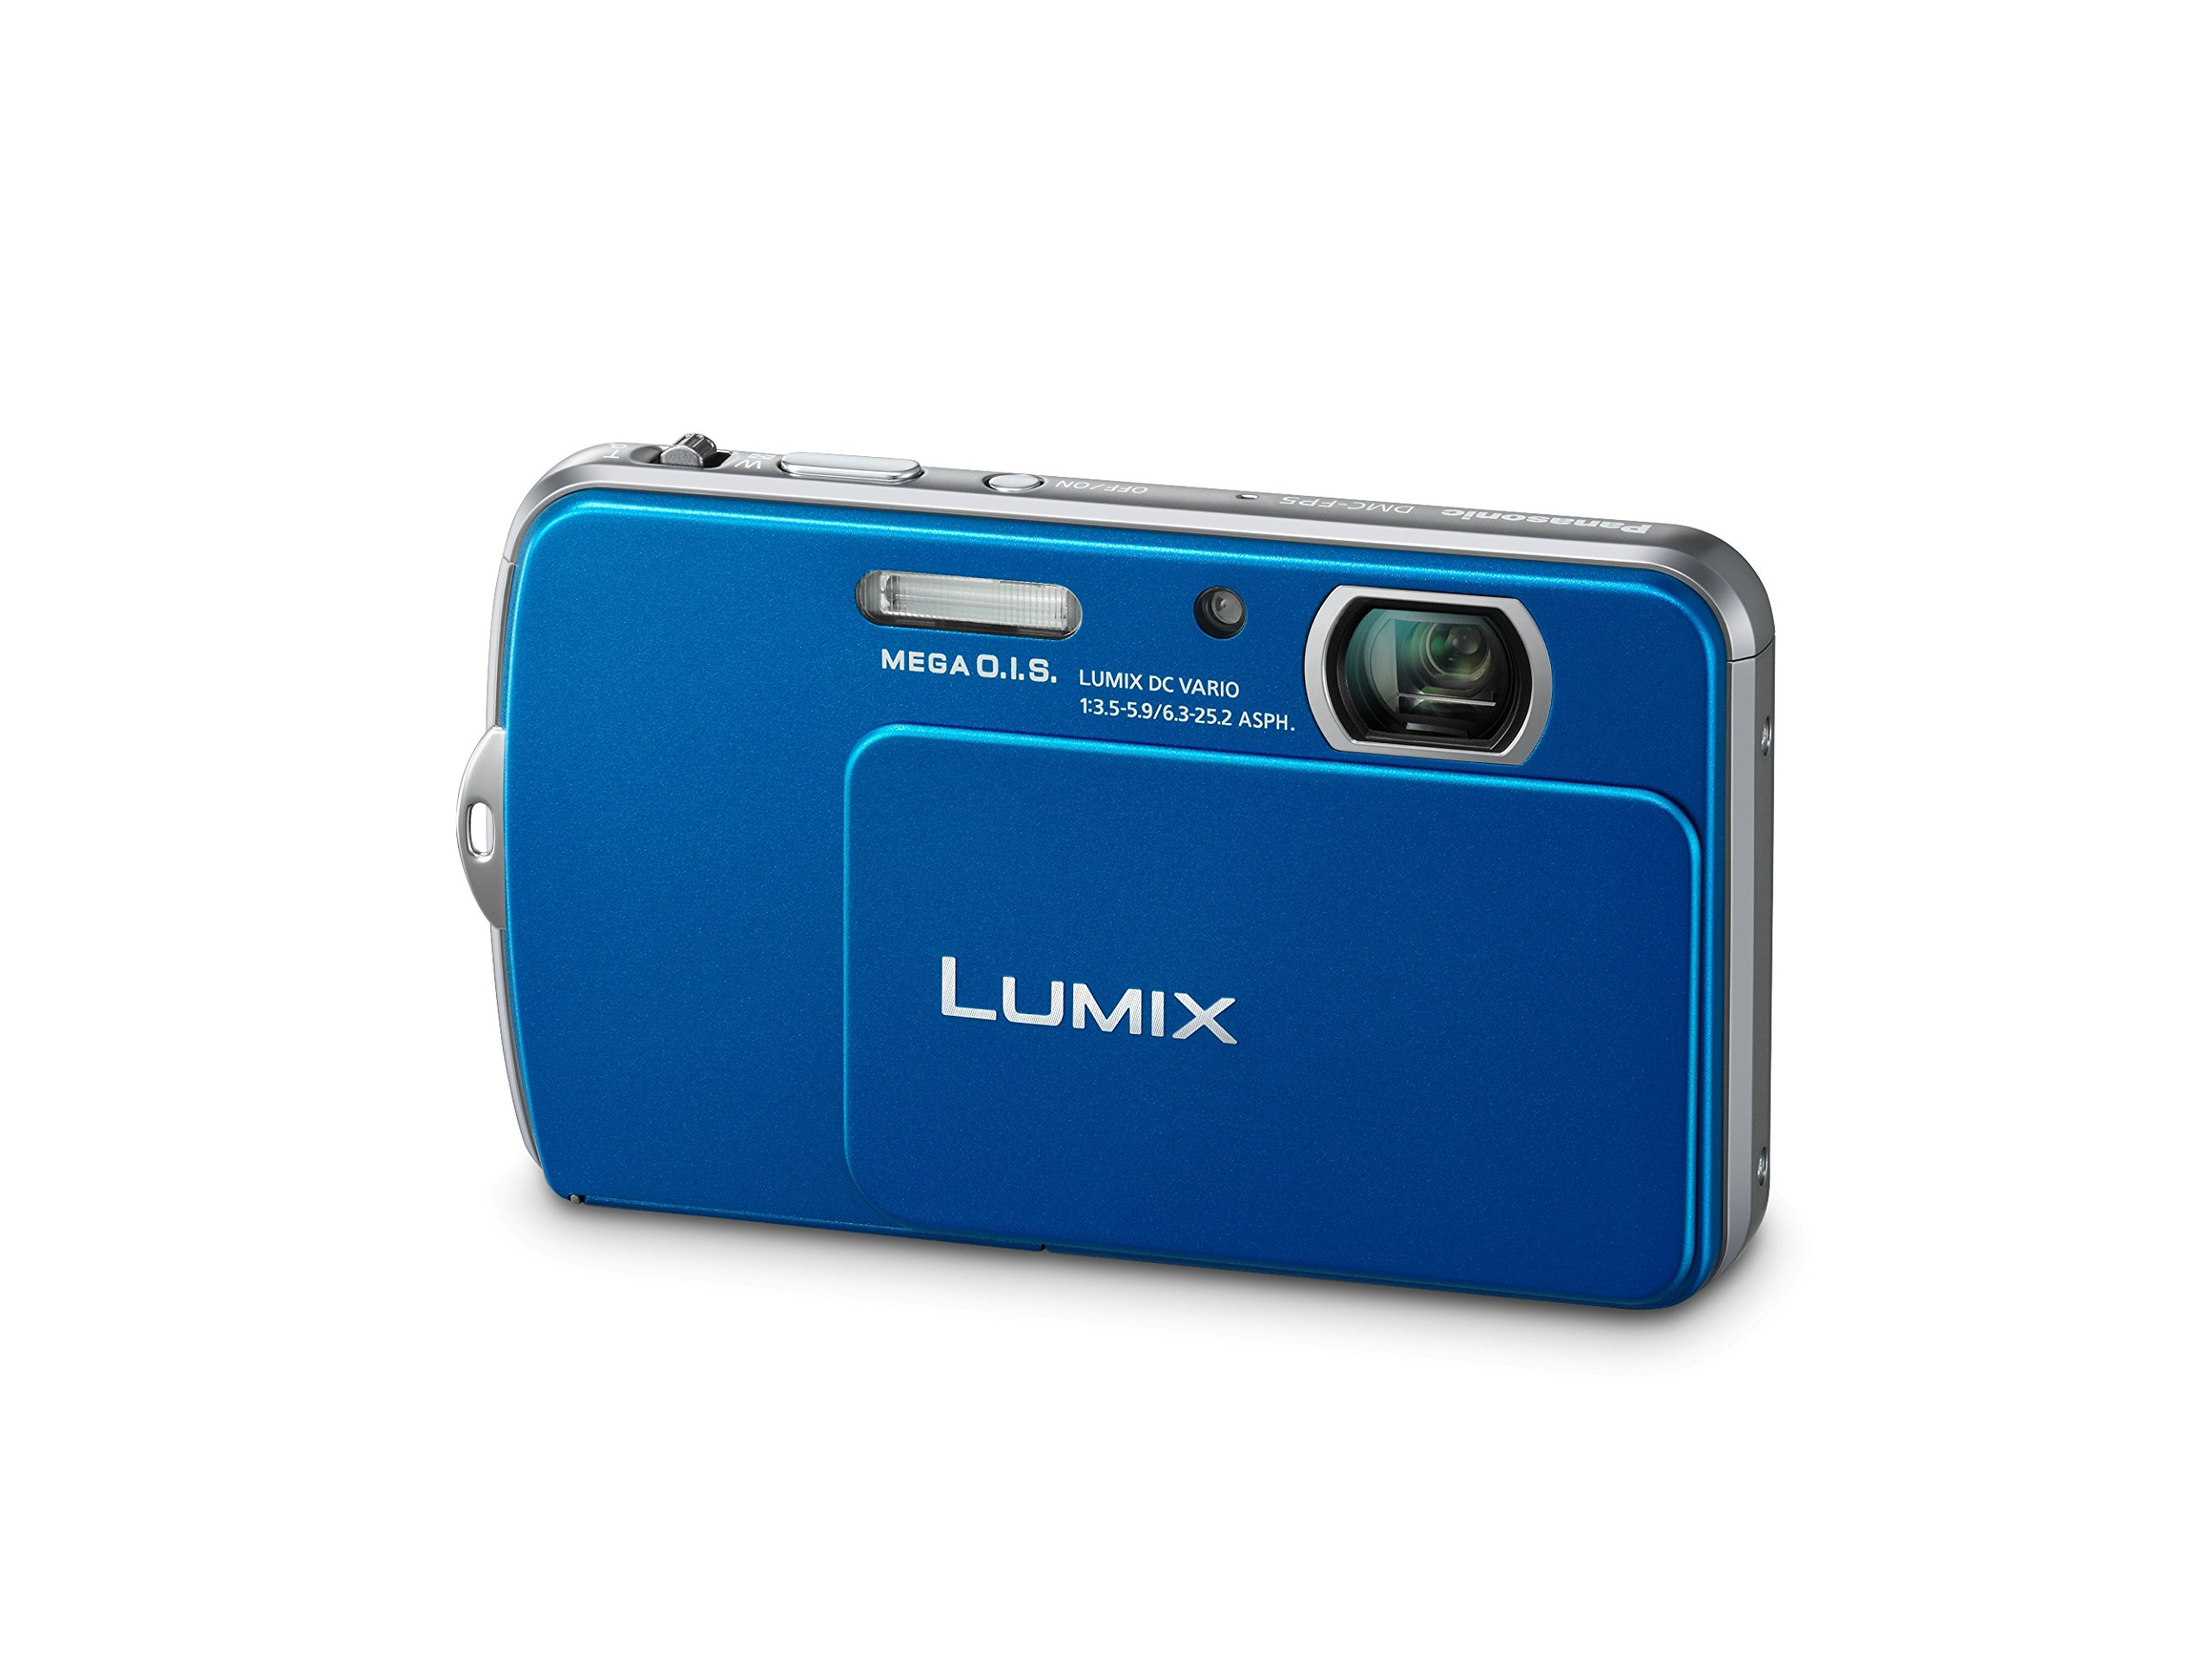 Panasonic Lumix DMC-FP5 14.1 MP Digital Camera with 4x Optical Image Stabilized Zoom with 3.0-Inch Touch-Screen LCD (Blue)